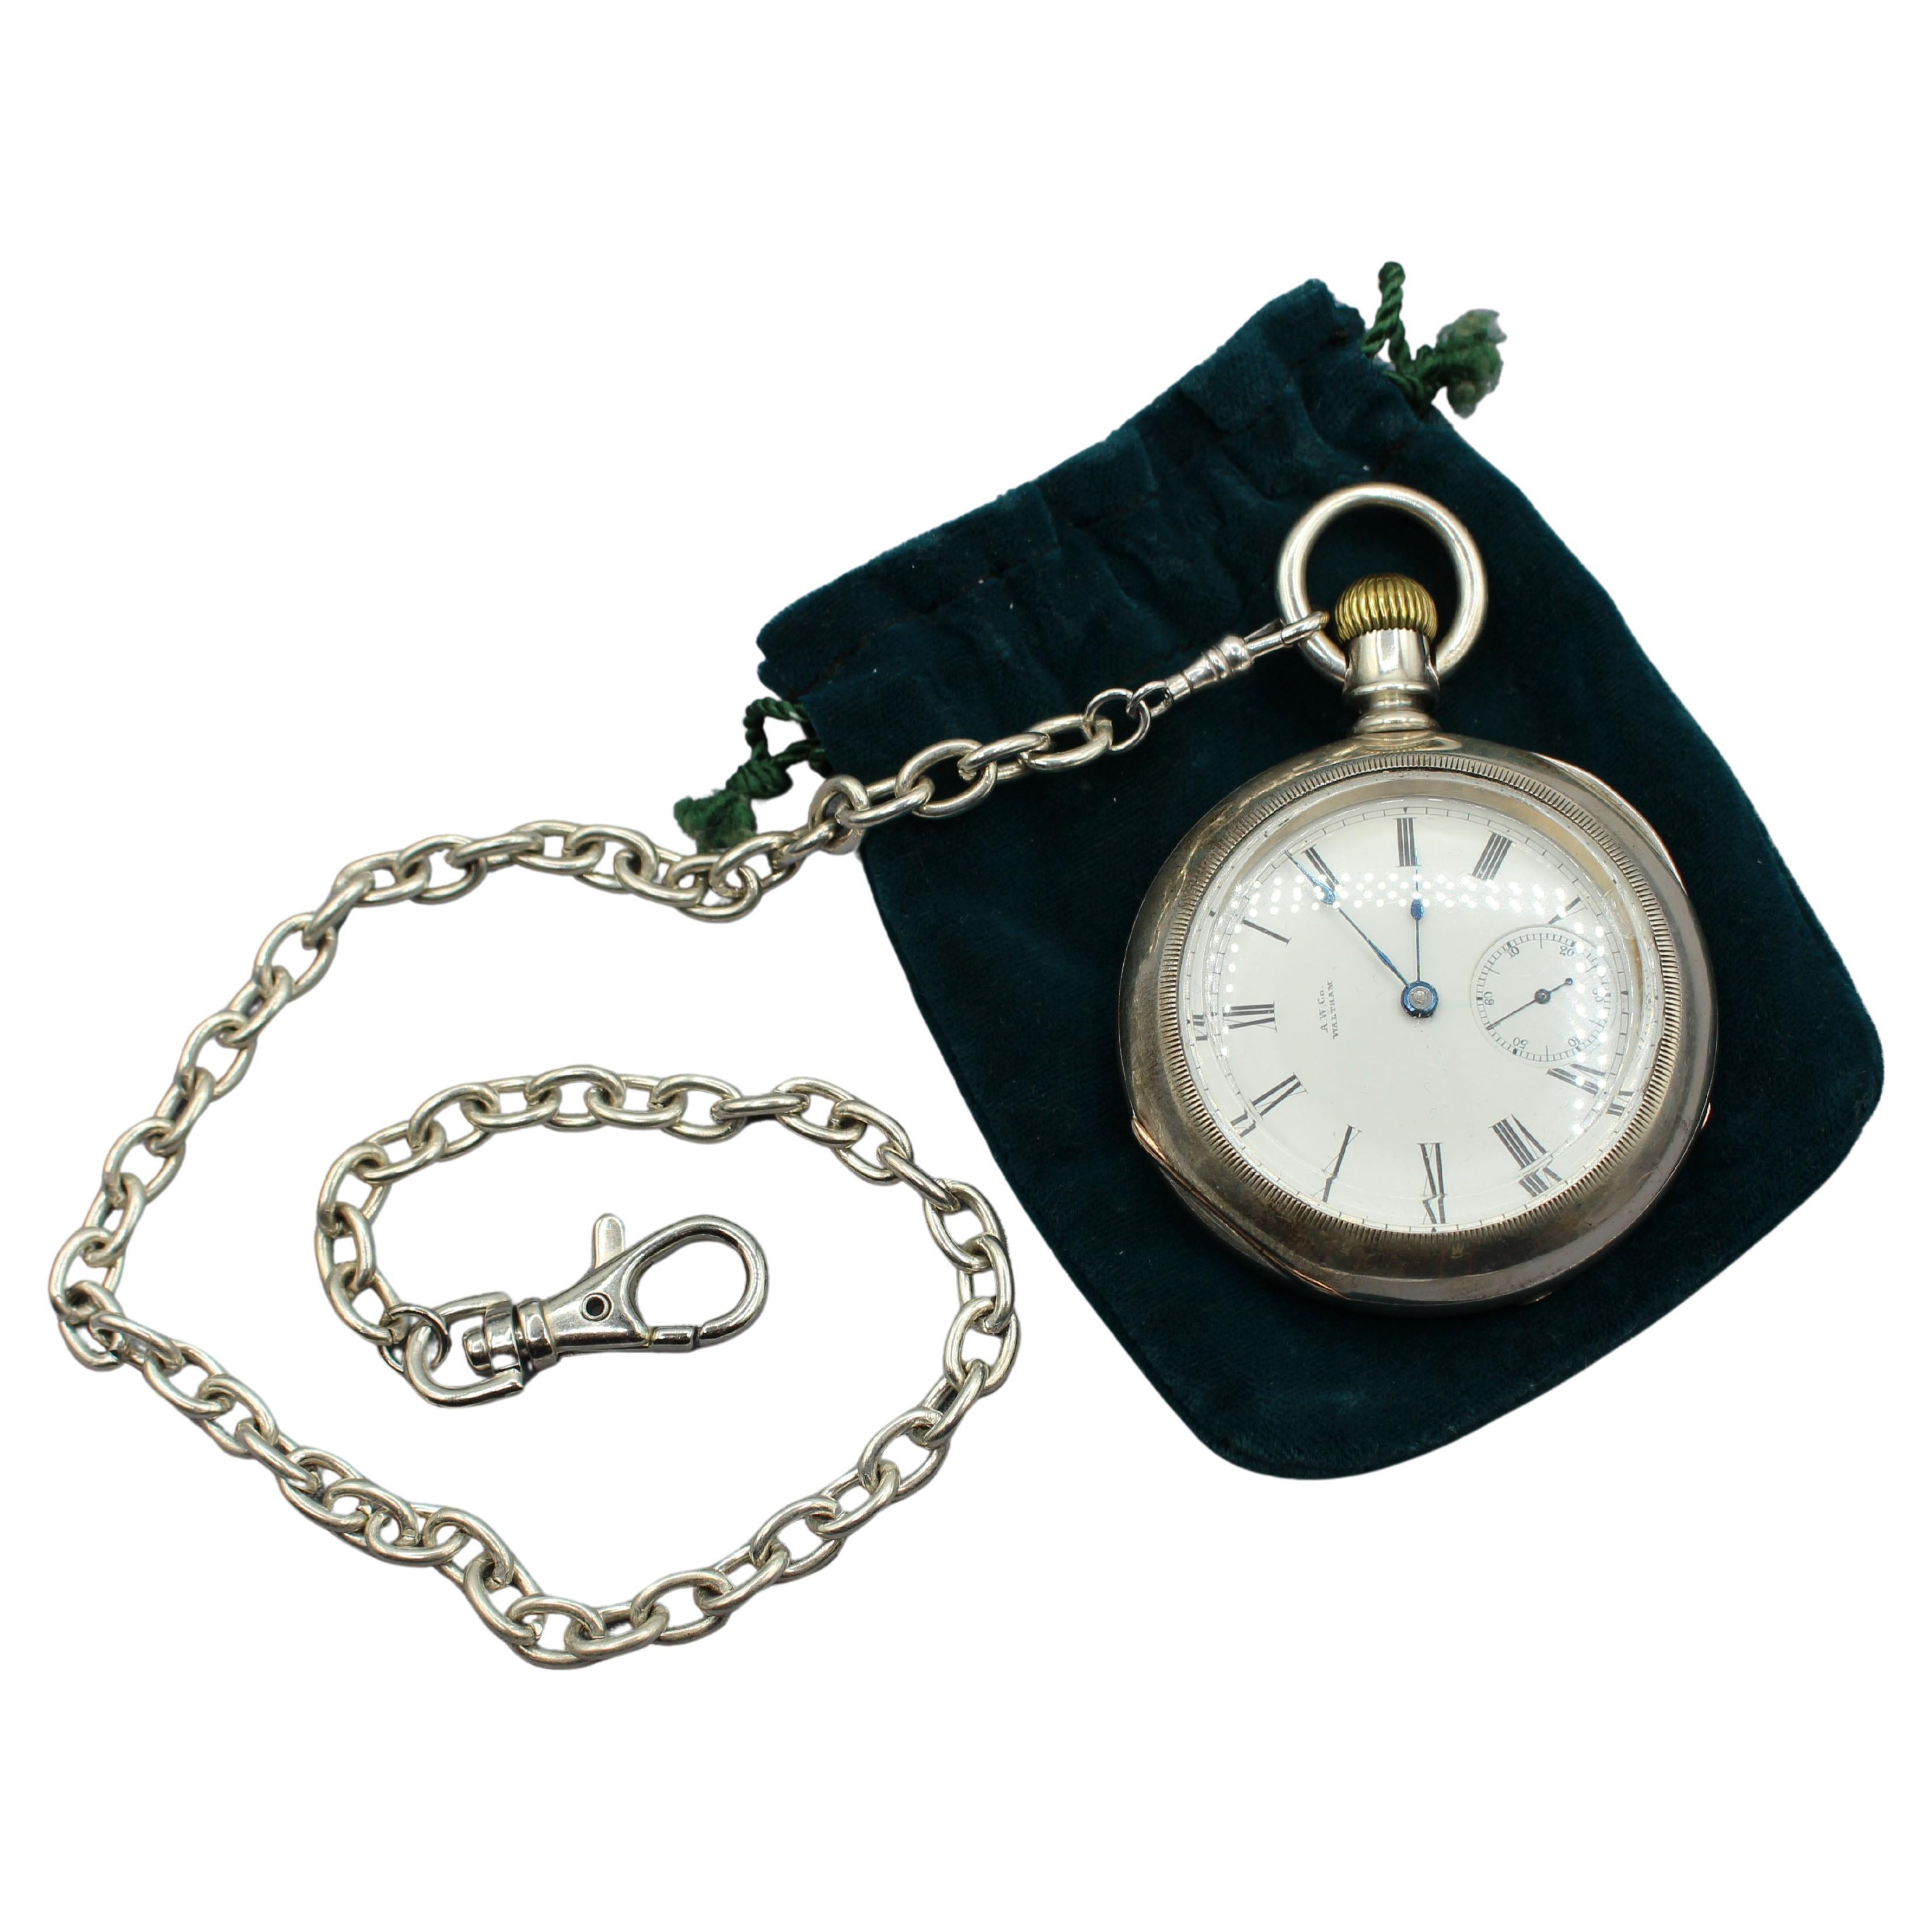 c. 1886 Coin Silver Pocket Watch by American Watch Co.